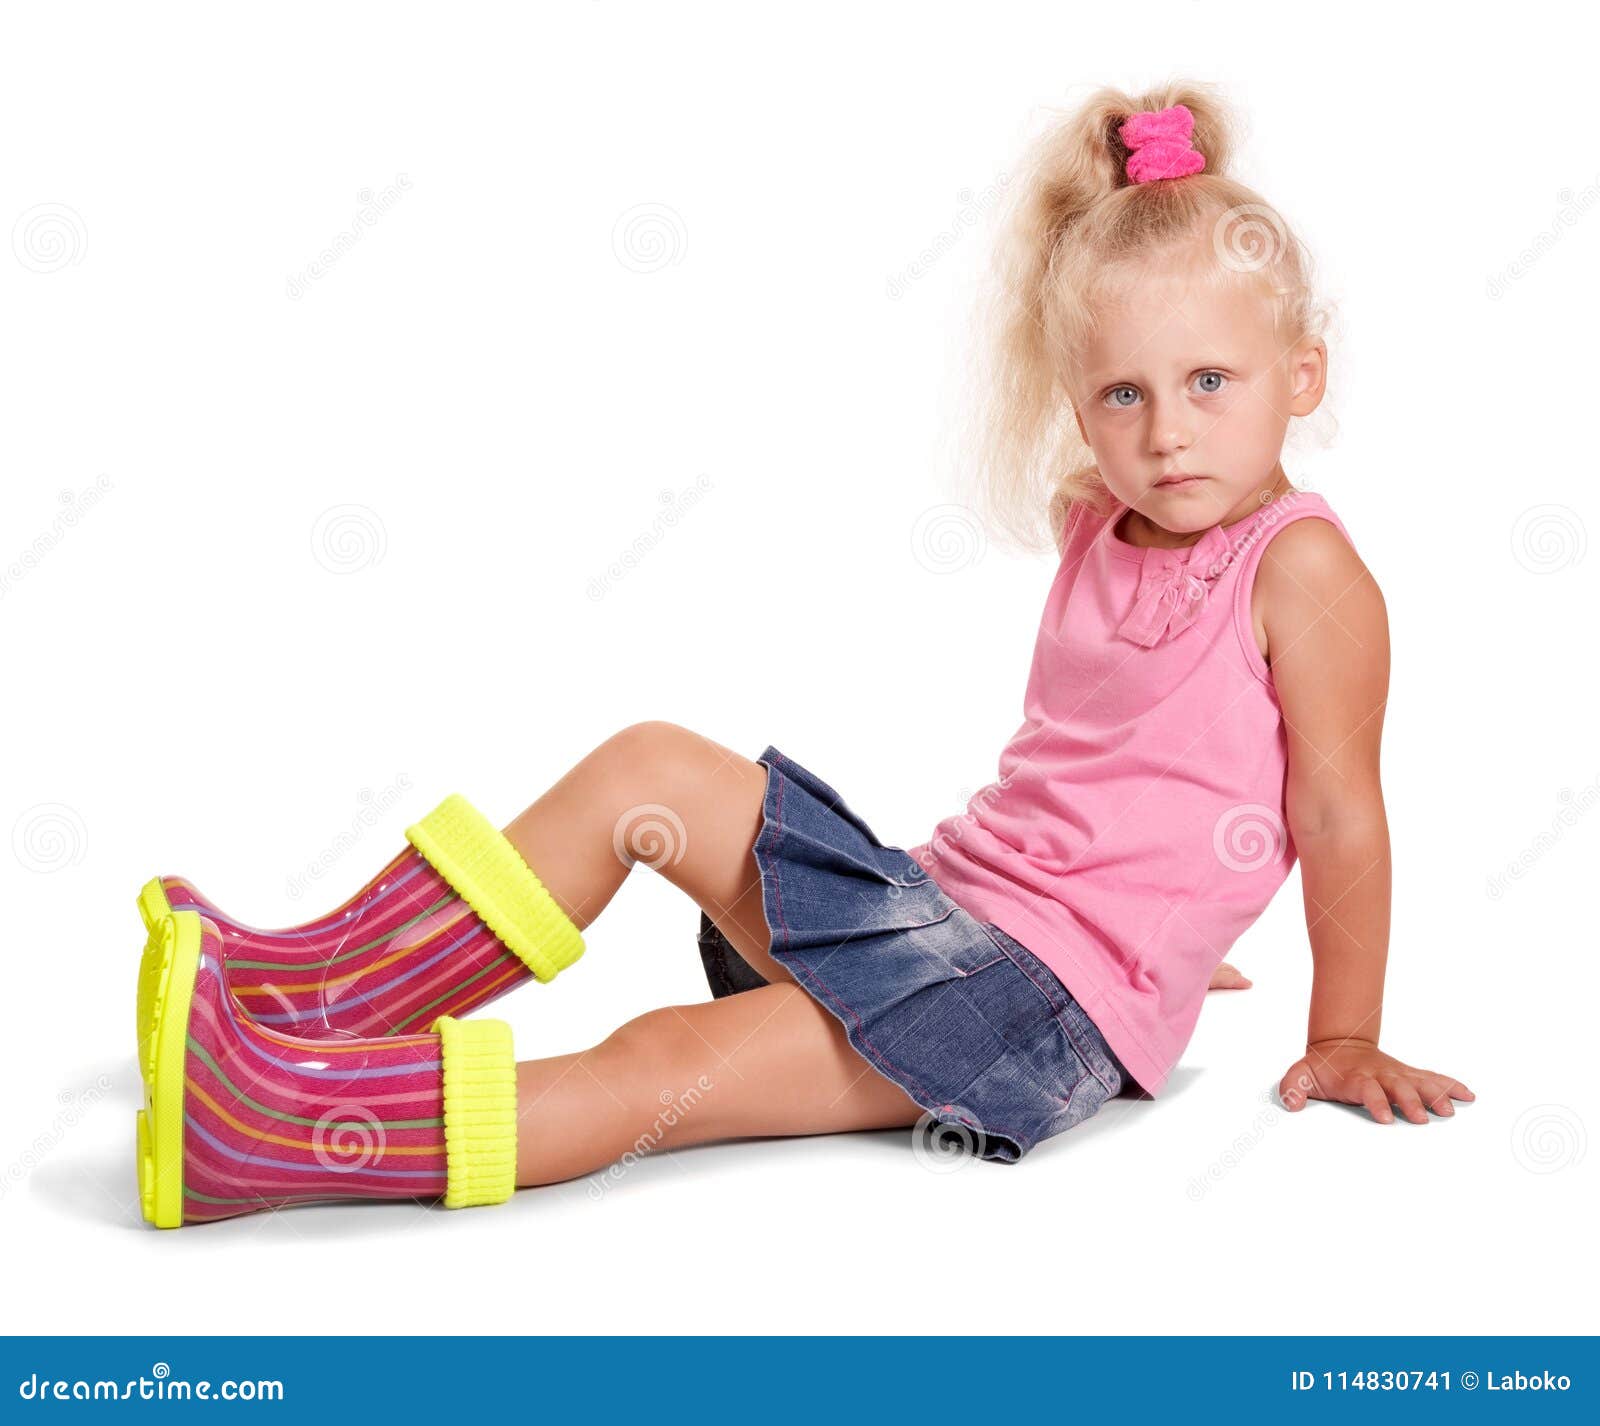 Innocent alarm Validation Little Sad Girl in Rubber Boots Sitting Isolated on White Stock Image -  Image of beauty, colorful: 114830741